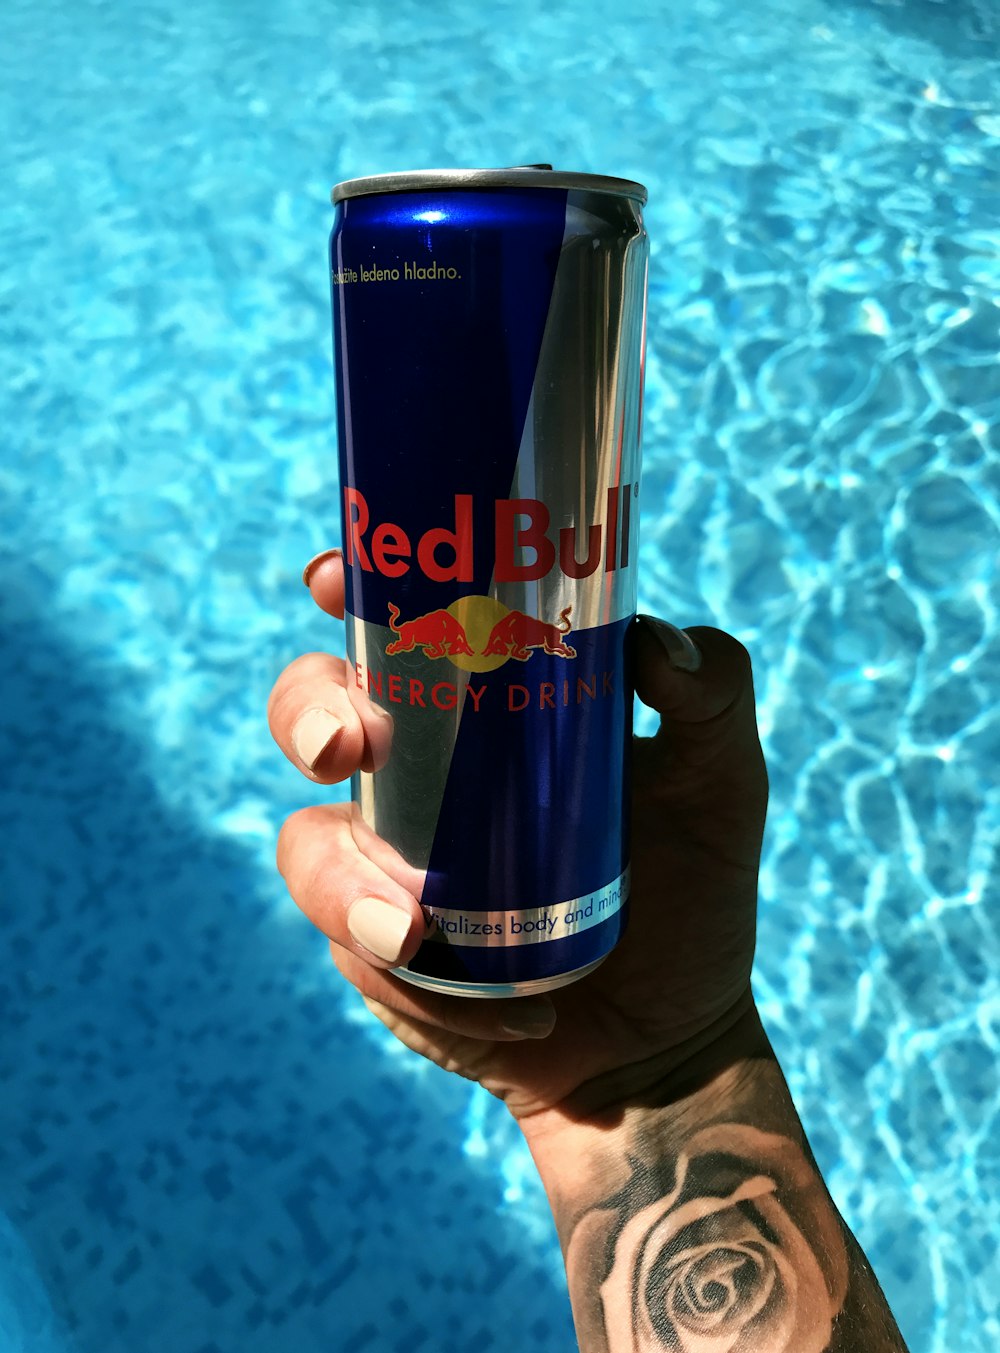 500 Red Bull Pictures Hd Download Free Images On Unsplash